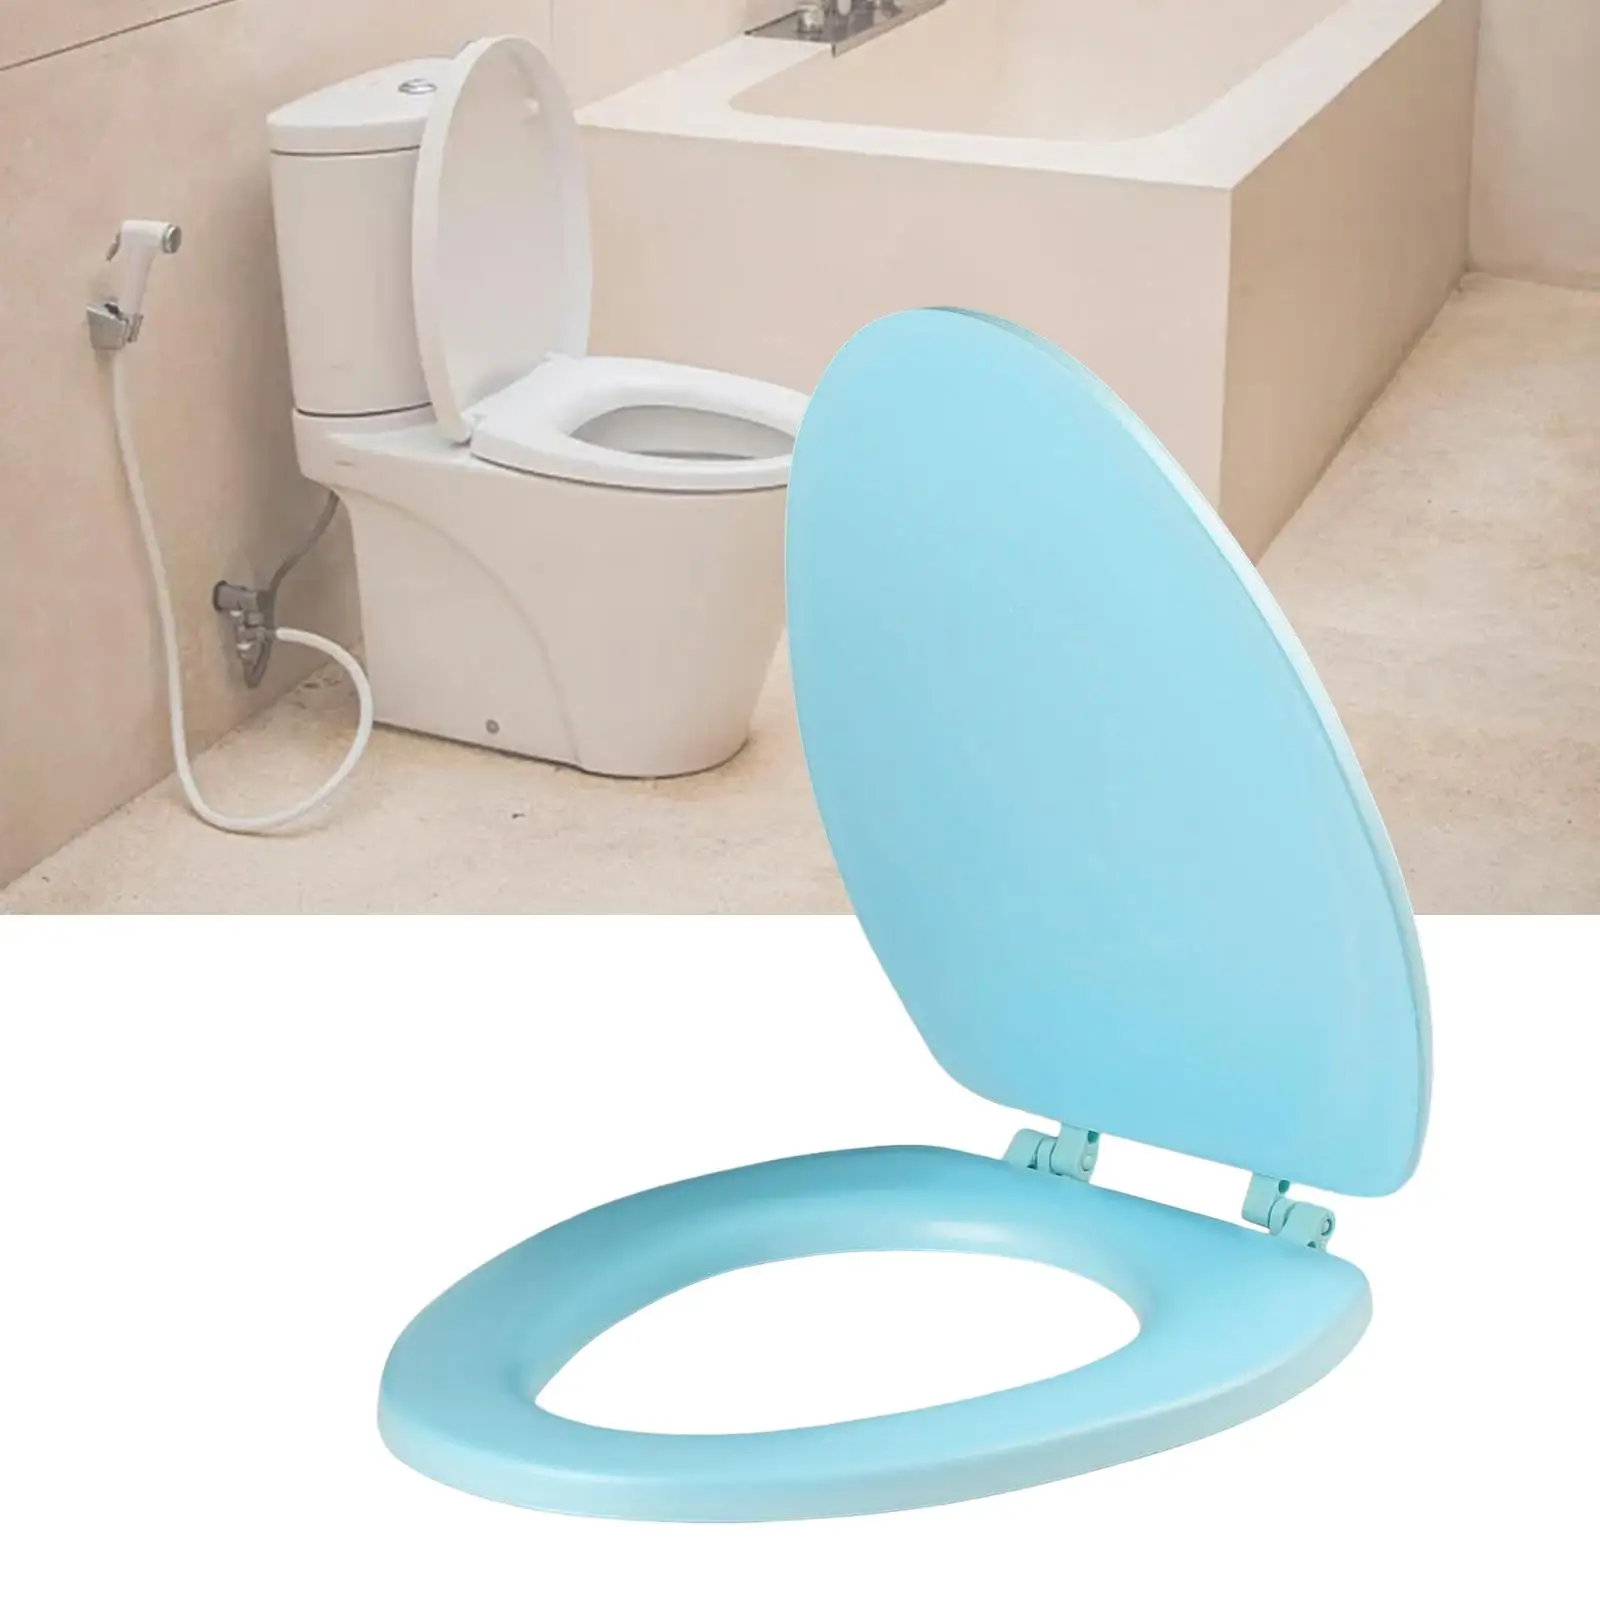 EVA Toilet Seat Cushion with Lid Durable Accessories Bathroom Supplies Waterproof Removable Reusable Washable Soft Pad Practical